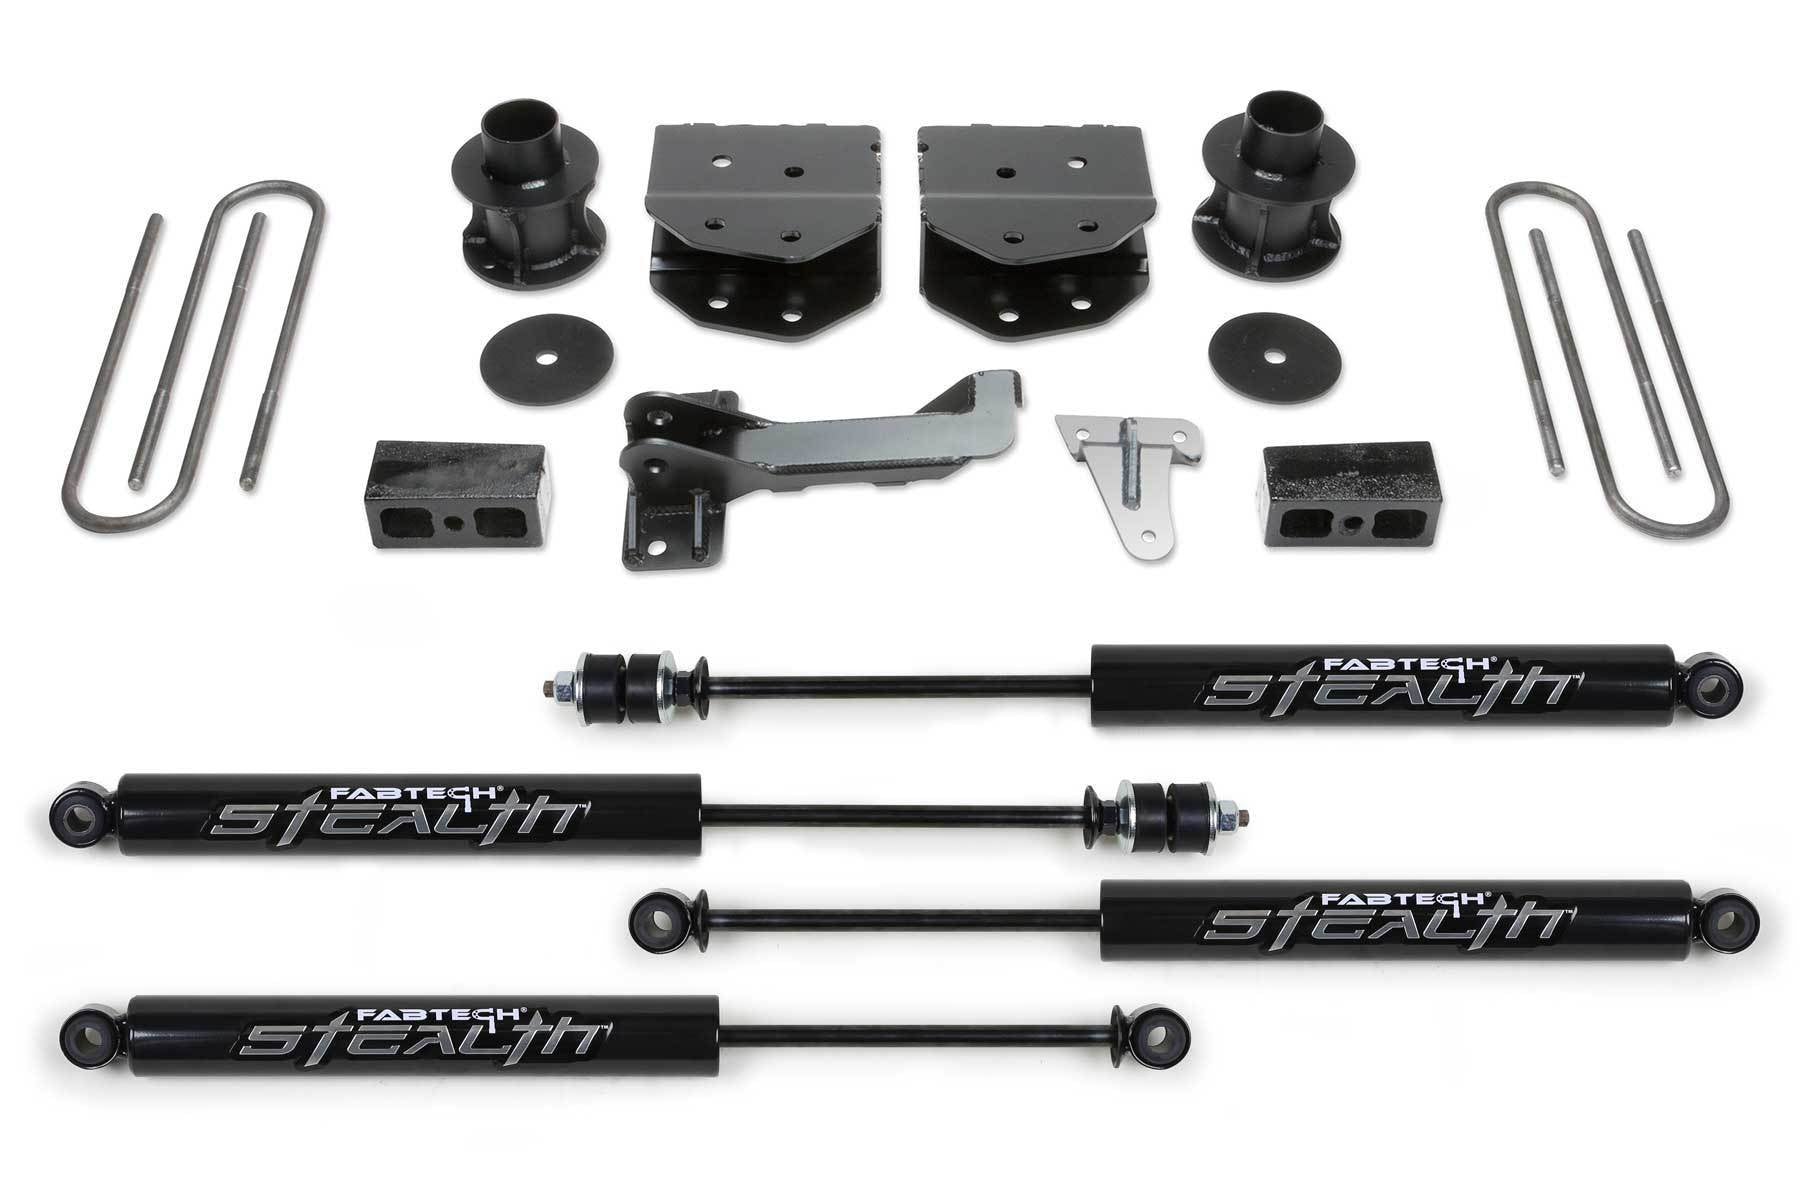 4" BUDGET SYS W/STEALTH 2008-16 FORD F250/350/450 4WD 8 LUG - 4" BUDGET SYS W/STEA - Fabtech - Texas Complete Truck Center